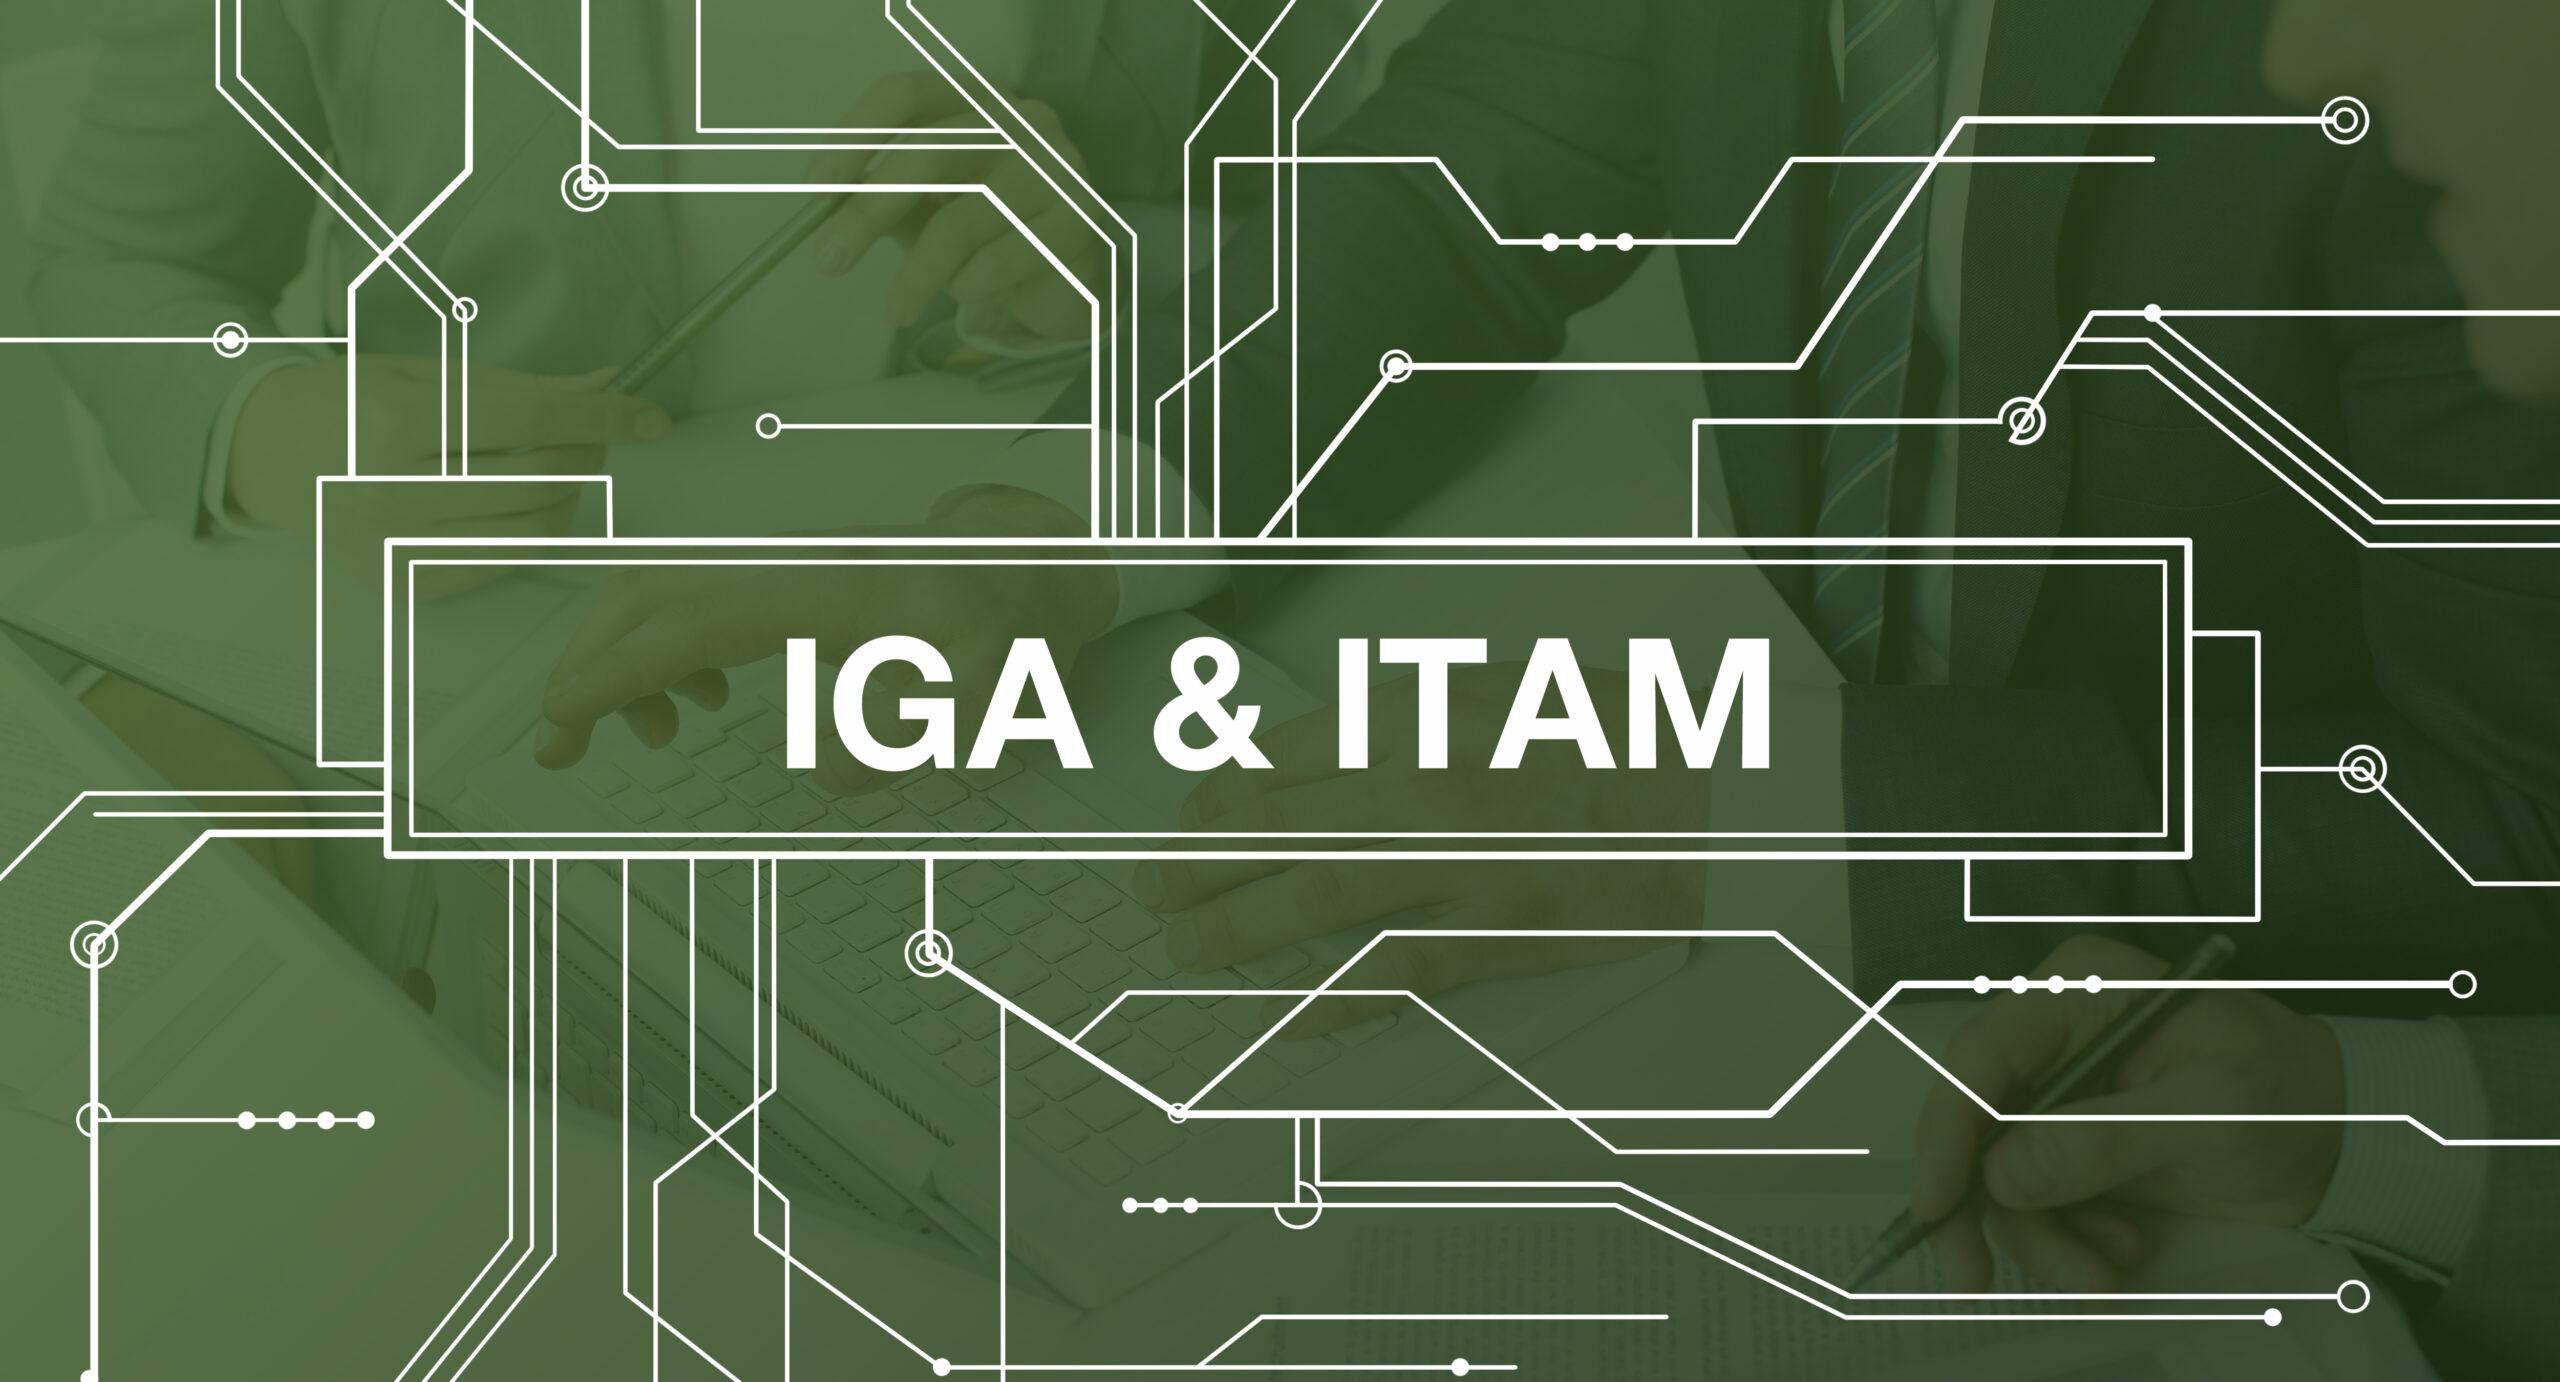 The relation between IGA and ITAM